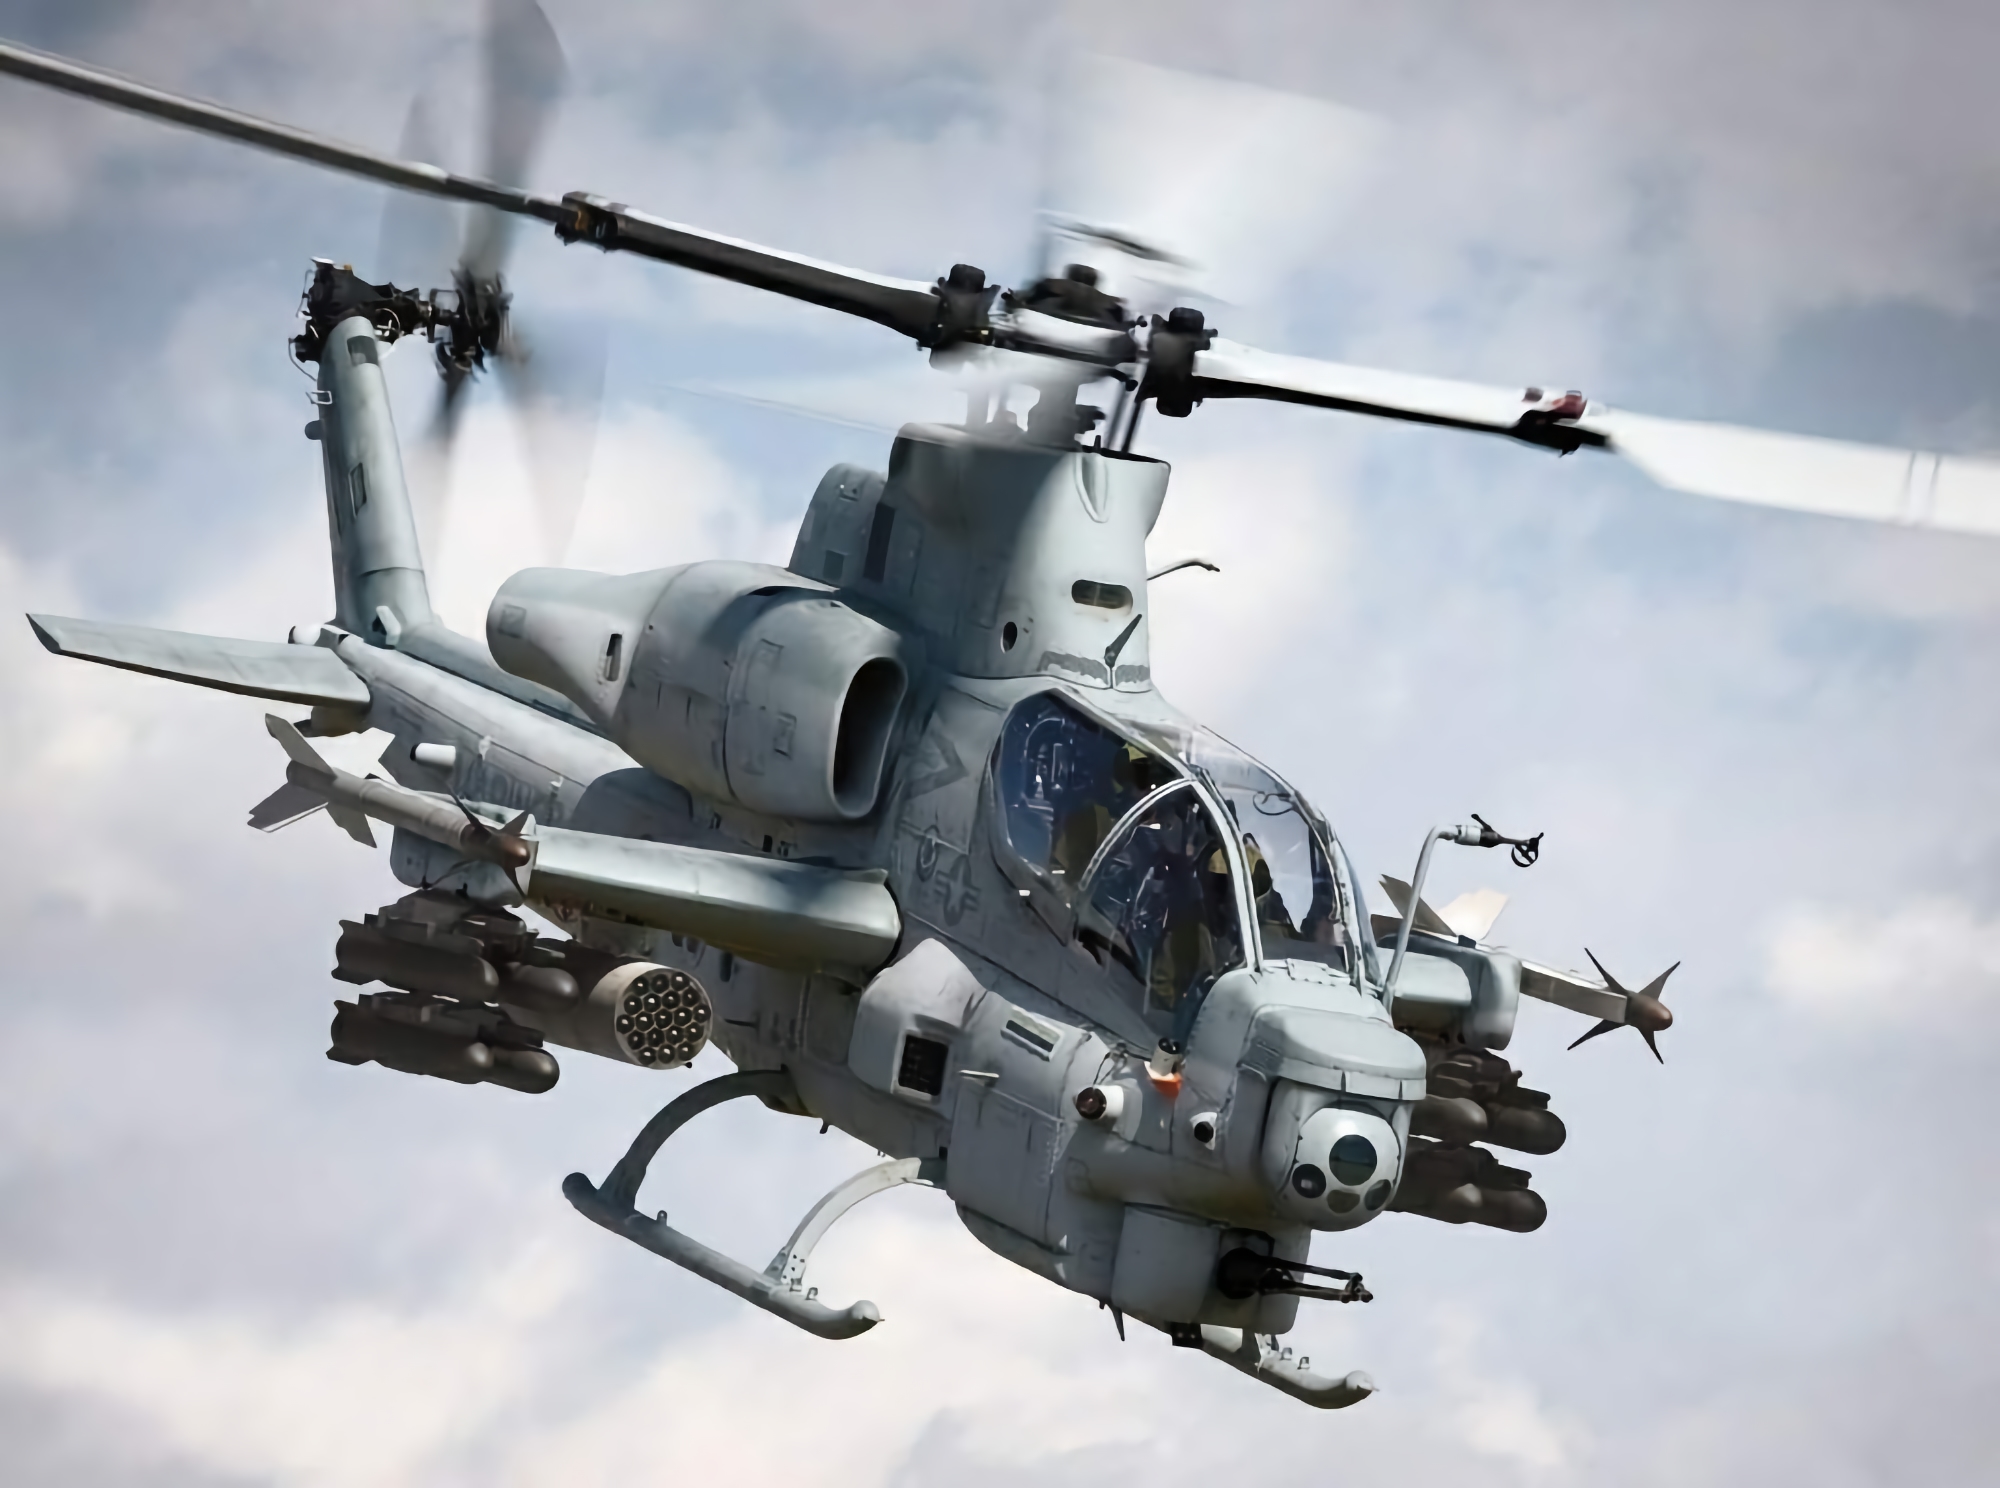 Replacing the Mi-24 and Mi-35: The Czech Republic will receive six Bell AH-1Z Viper attack helicopters and two multi-purpose Bell UH-1Y Venom helicopters from the US